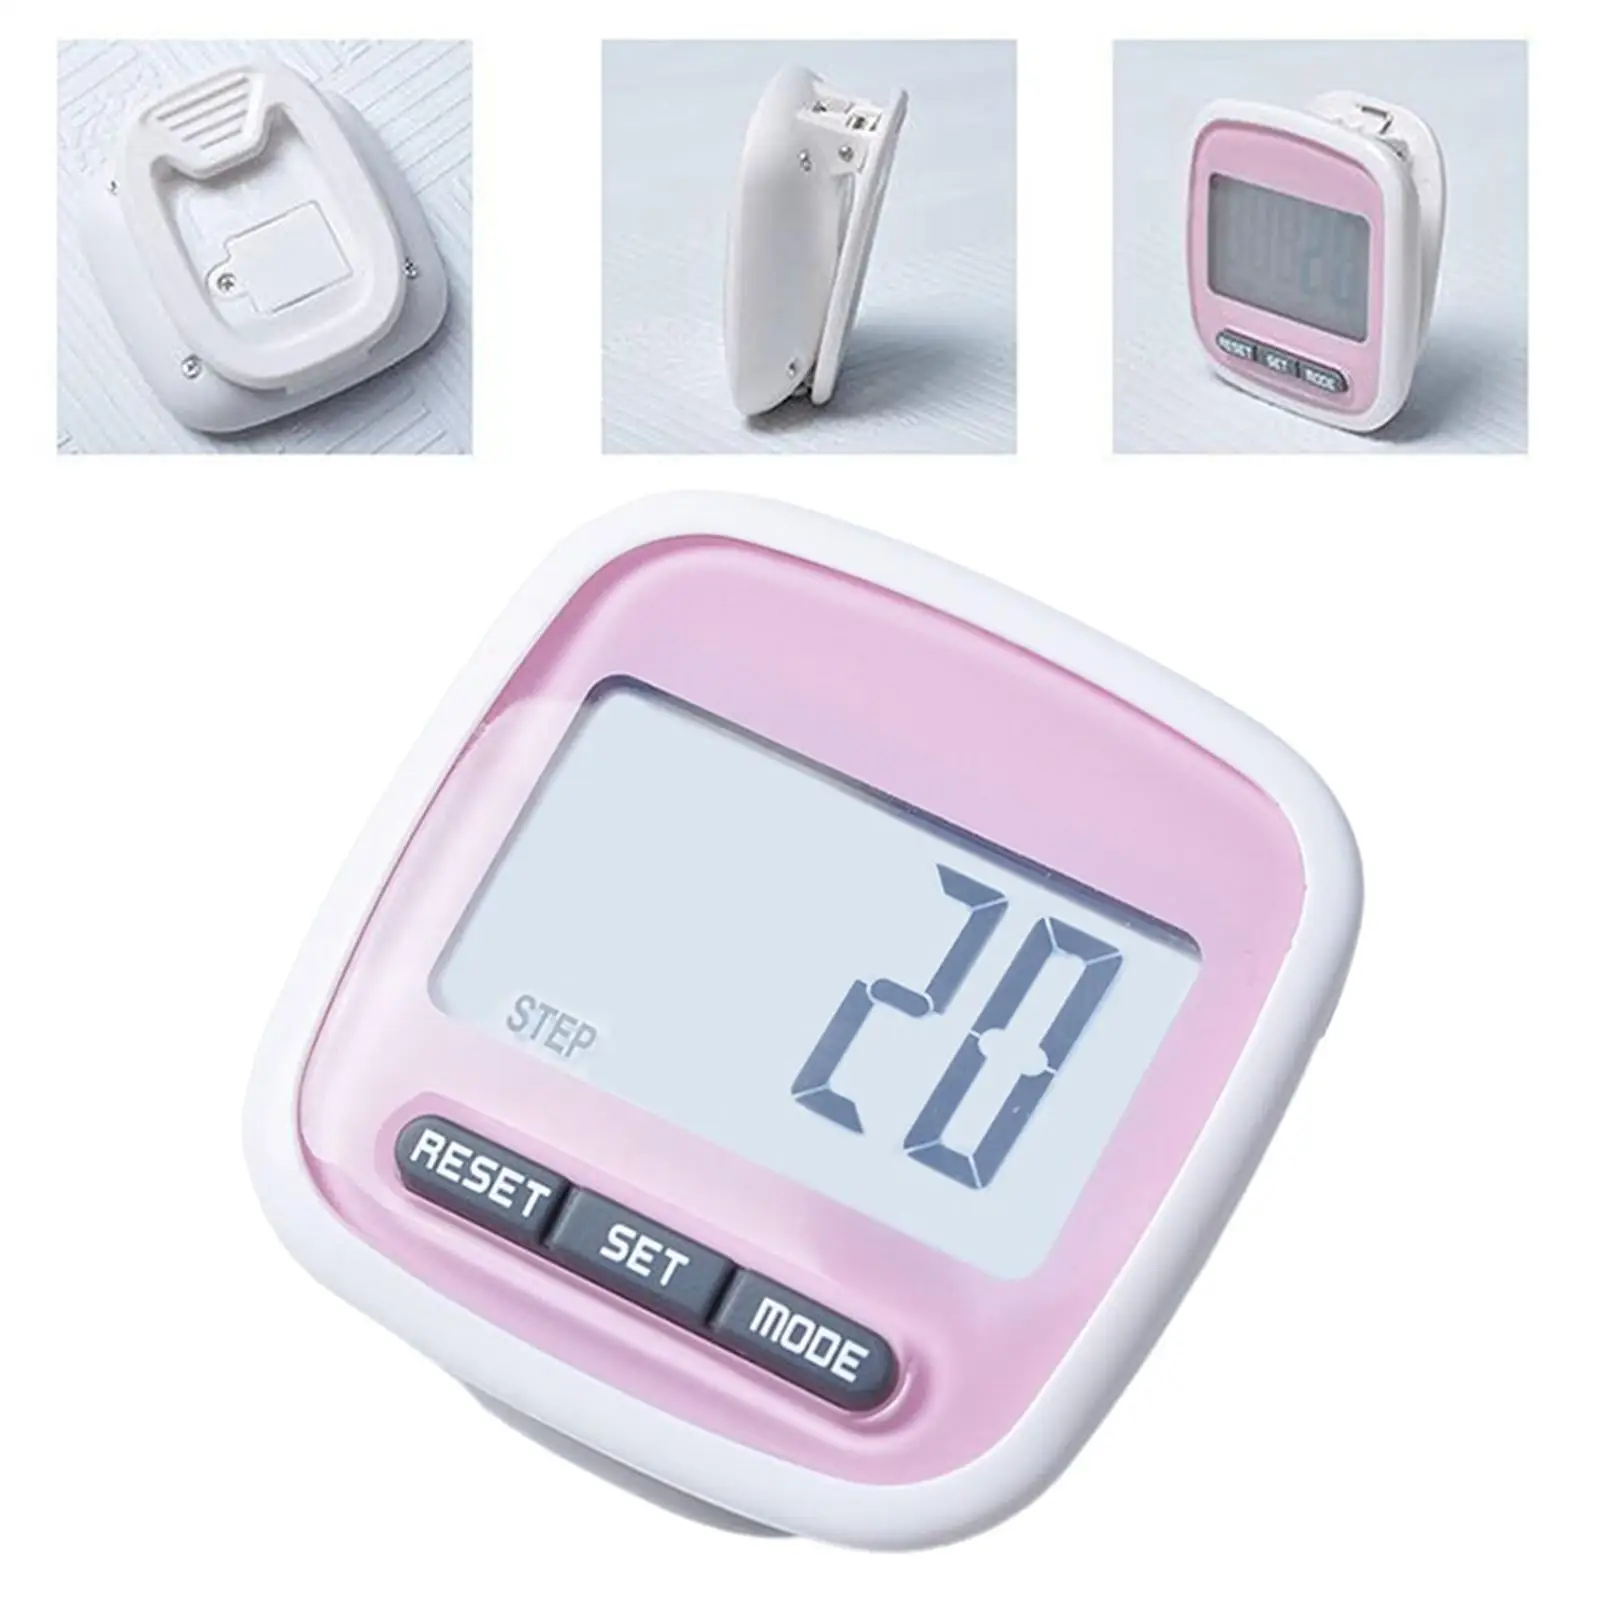 Portable Step Counters Fitness Calorie Distance Counting Step Counters for Outdoor Running Sports Jogging Walking Hiking